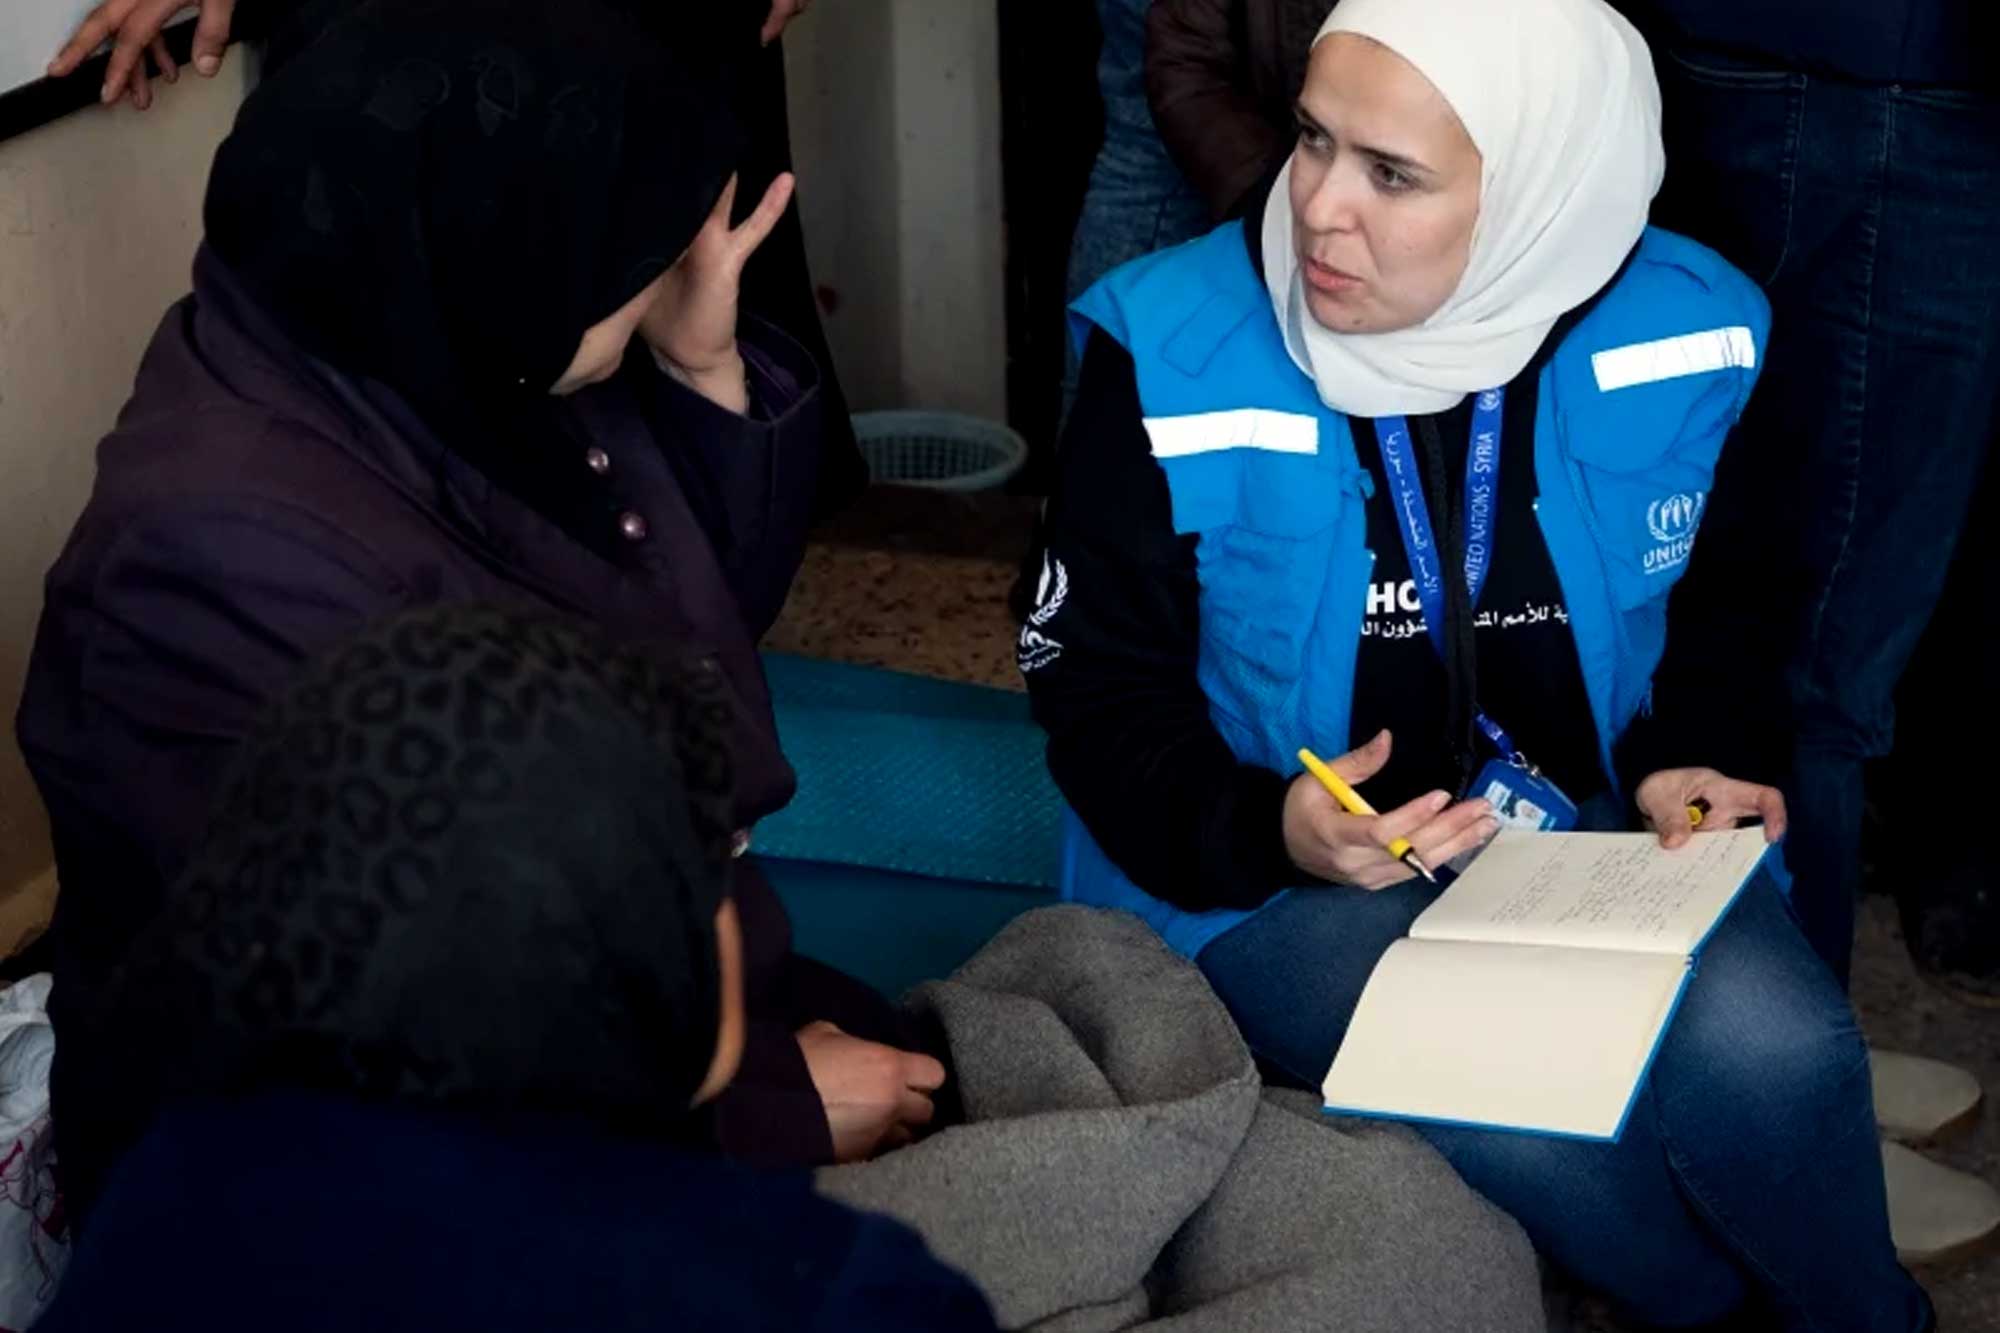 A woman wearing a UNHCR vest speaks to another woman in black